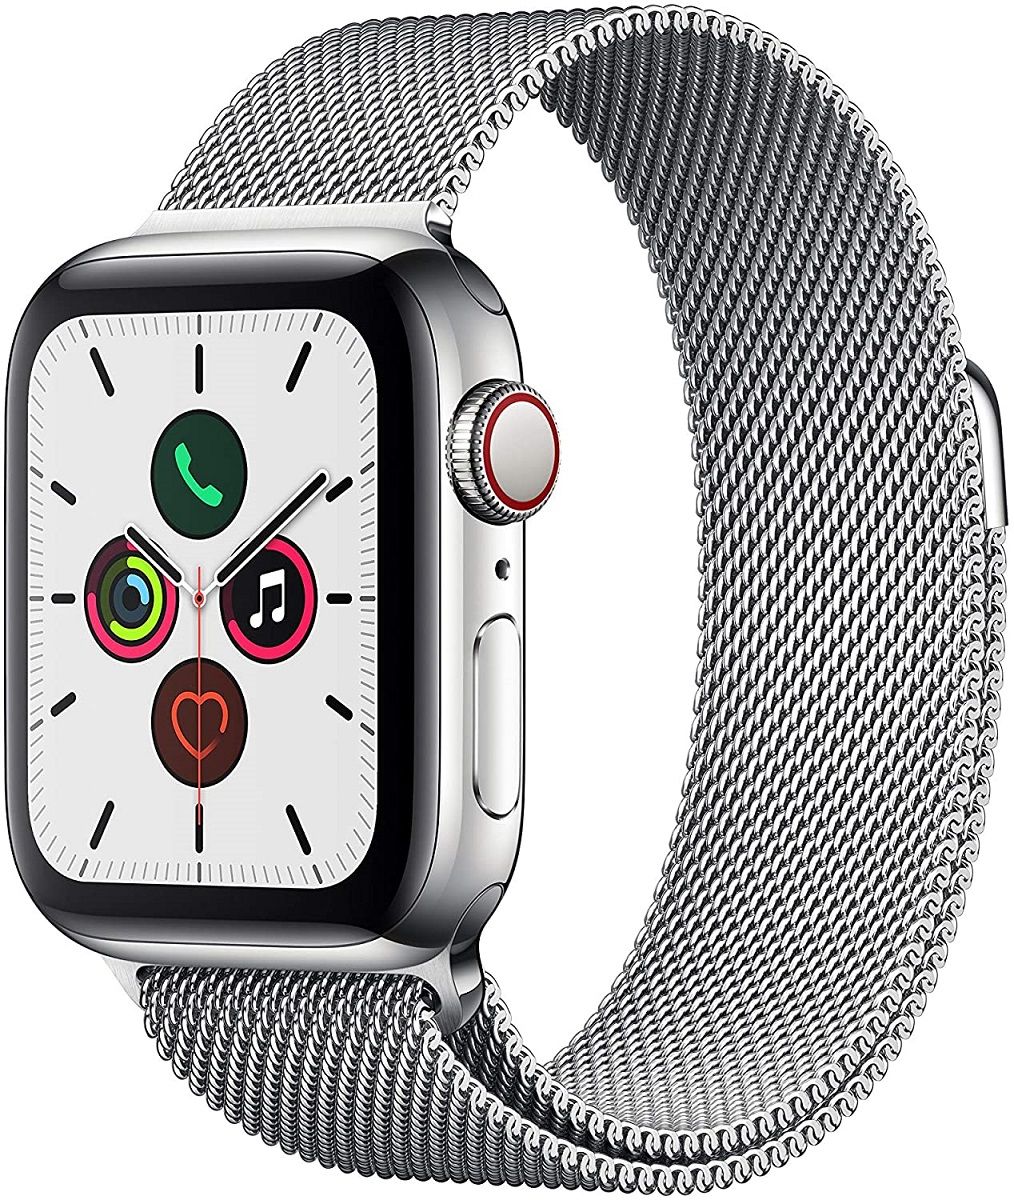 An overview of Apple Watch 5 with a braided band